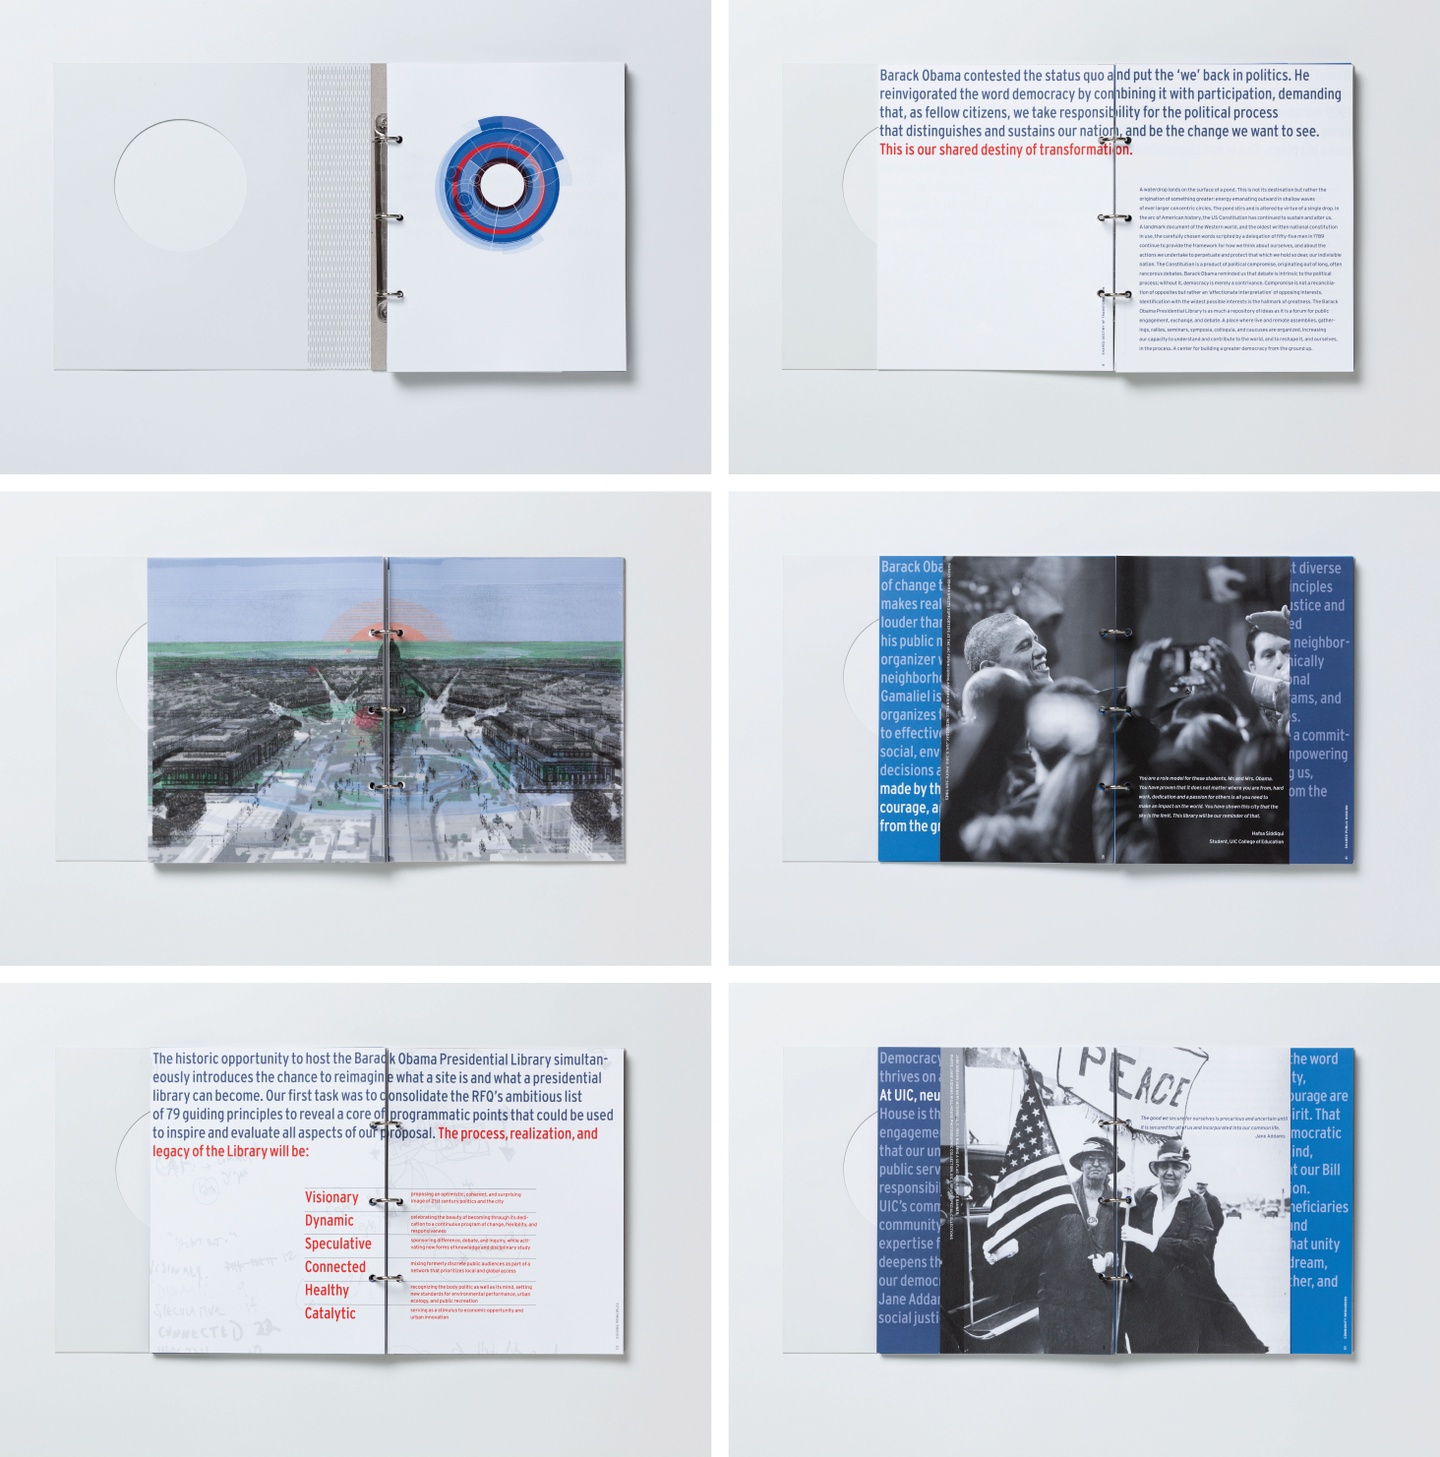 Six images of a book, one of the inside cover and the others of spreads. Spreads depict various text and photography, some of which is black and white. The colors red, blue, white, and black are prominent throughout.